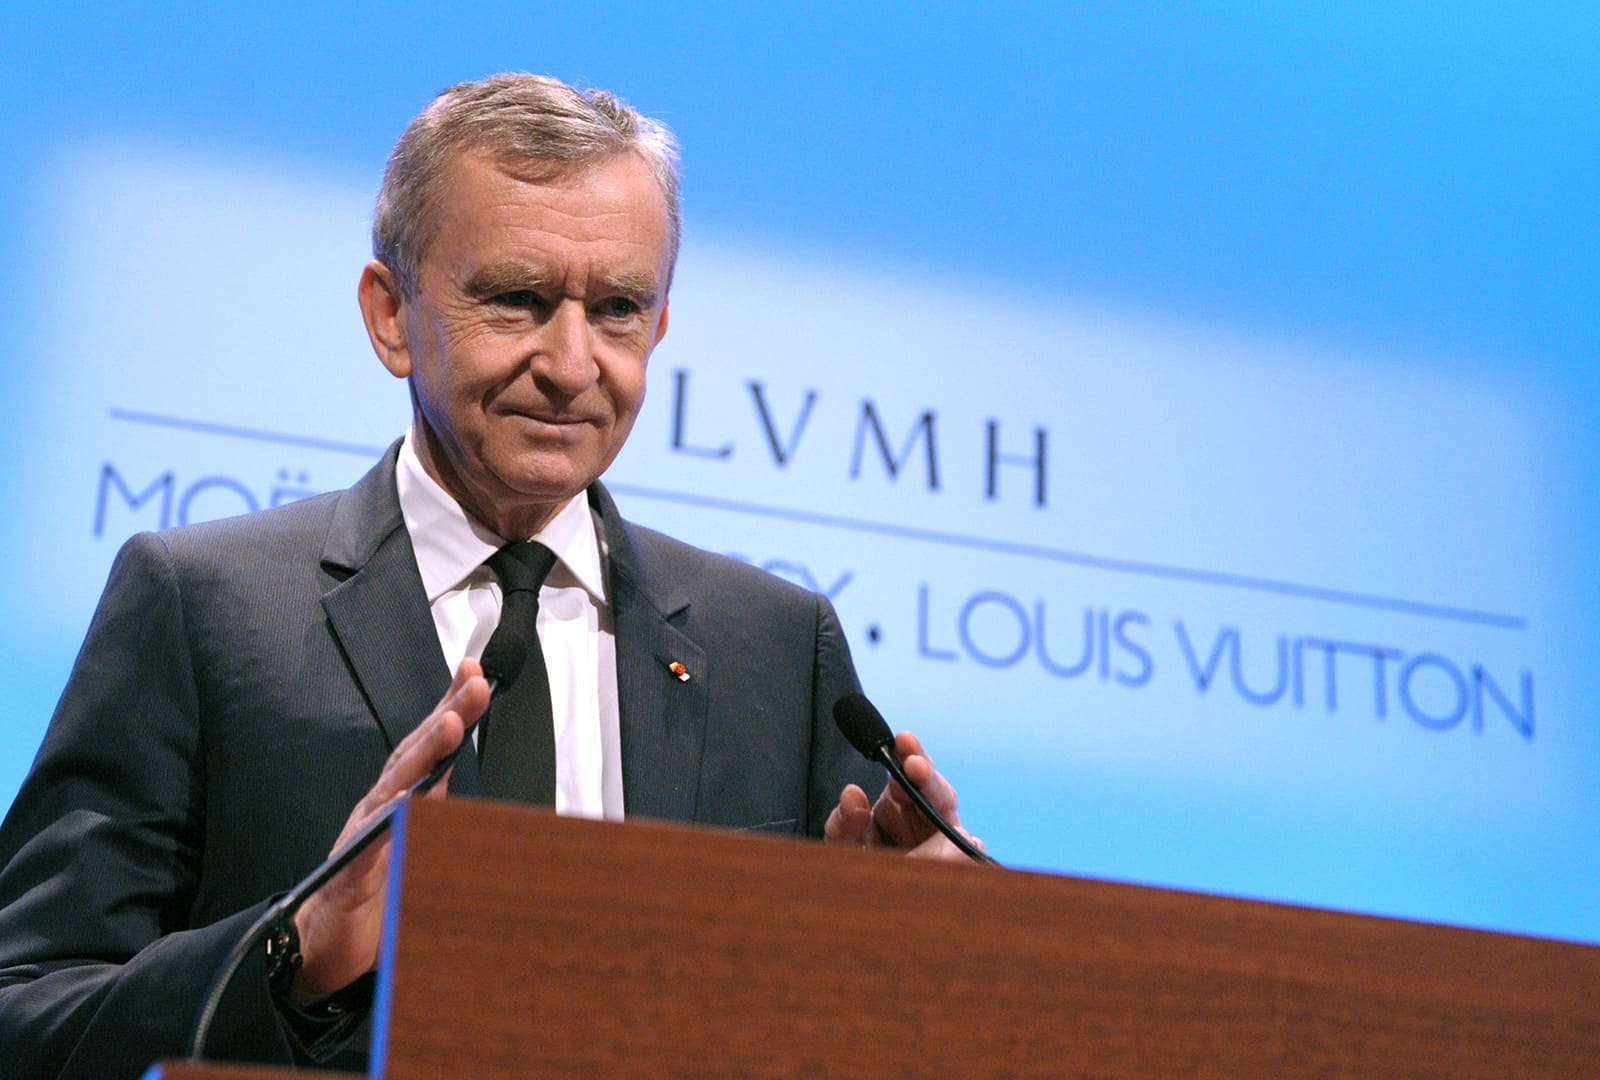 Lvmh Online Sales Reporting | IQS Executive